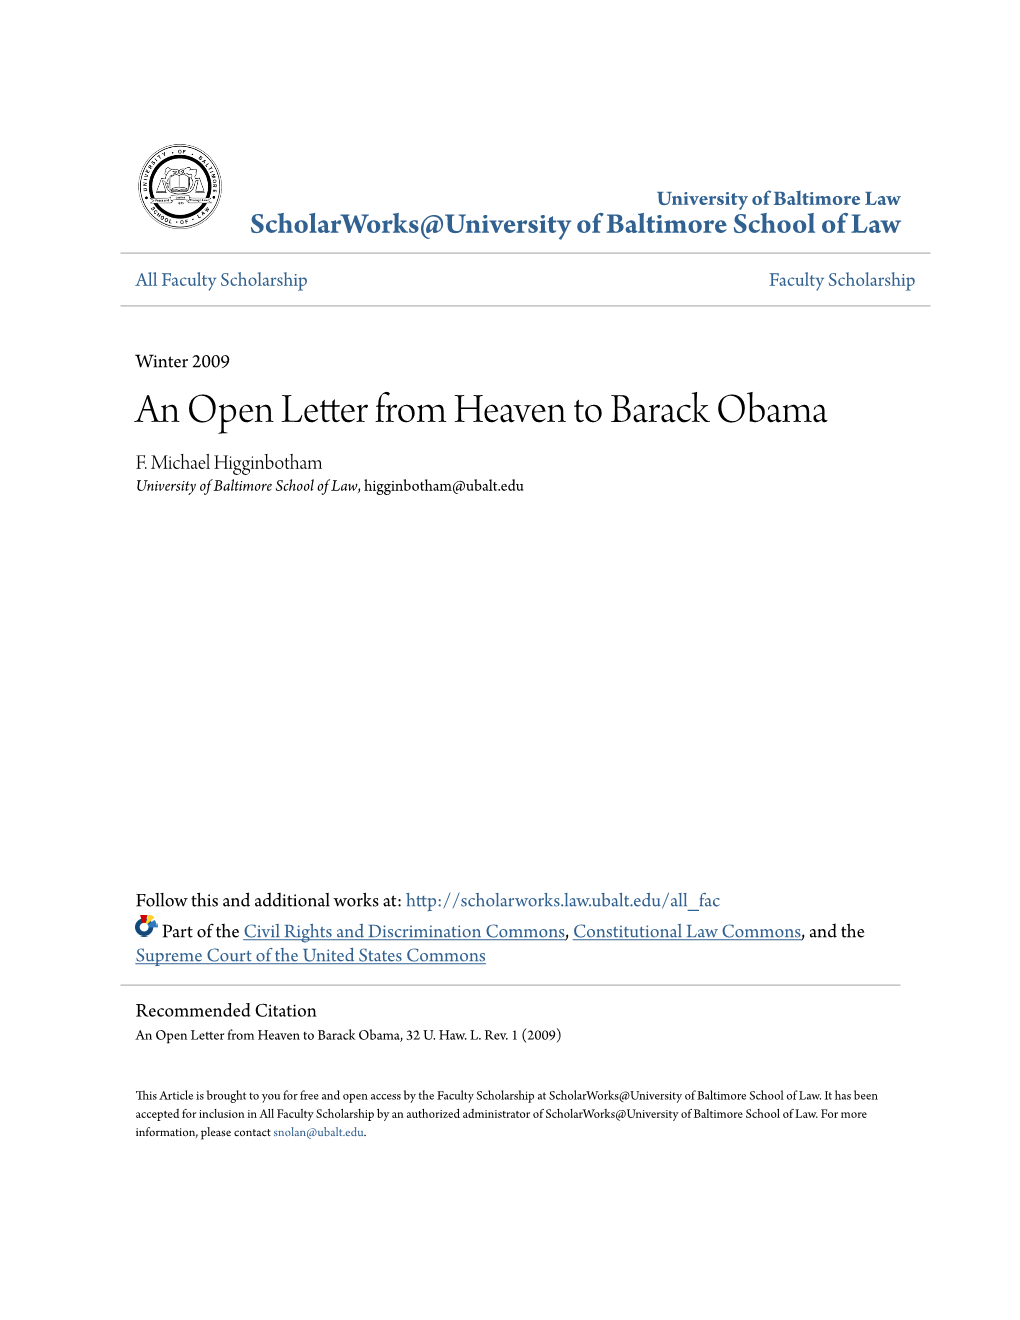 An Open Letter from Heaven to Barack Obama F